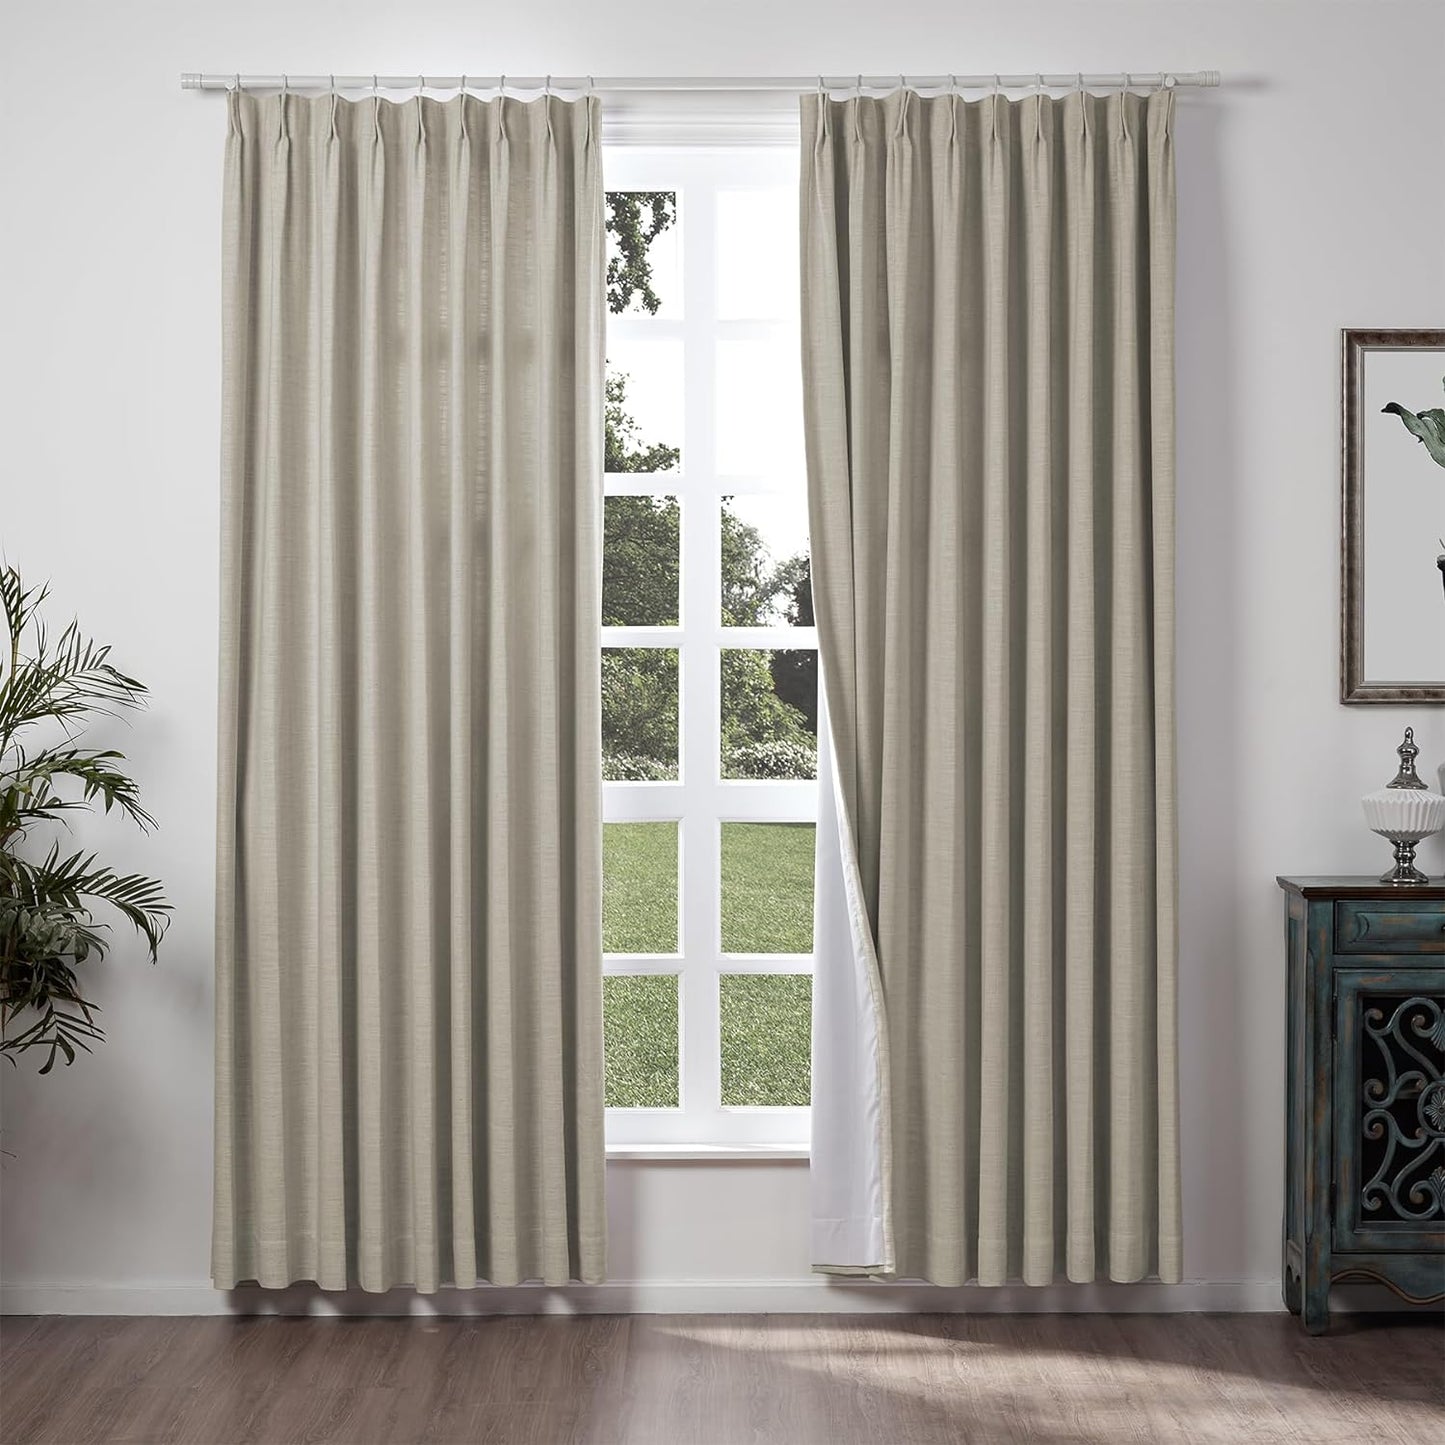 Chadmade 50" W X 84" L Polyester Linen Drape with Blackout Lining Pinch Pleat Curtain for Sliding Door Patio Door Living Room Bedroom, (1 Panel) Beige White Liz Collection  ChadMade Birch (5) 100Wx102L 